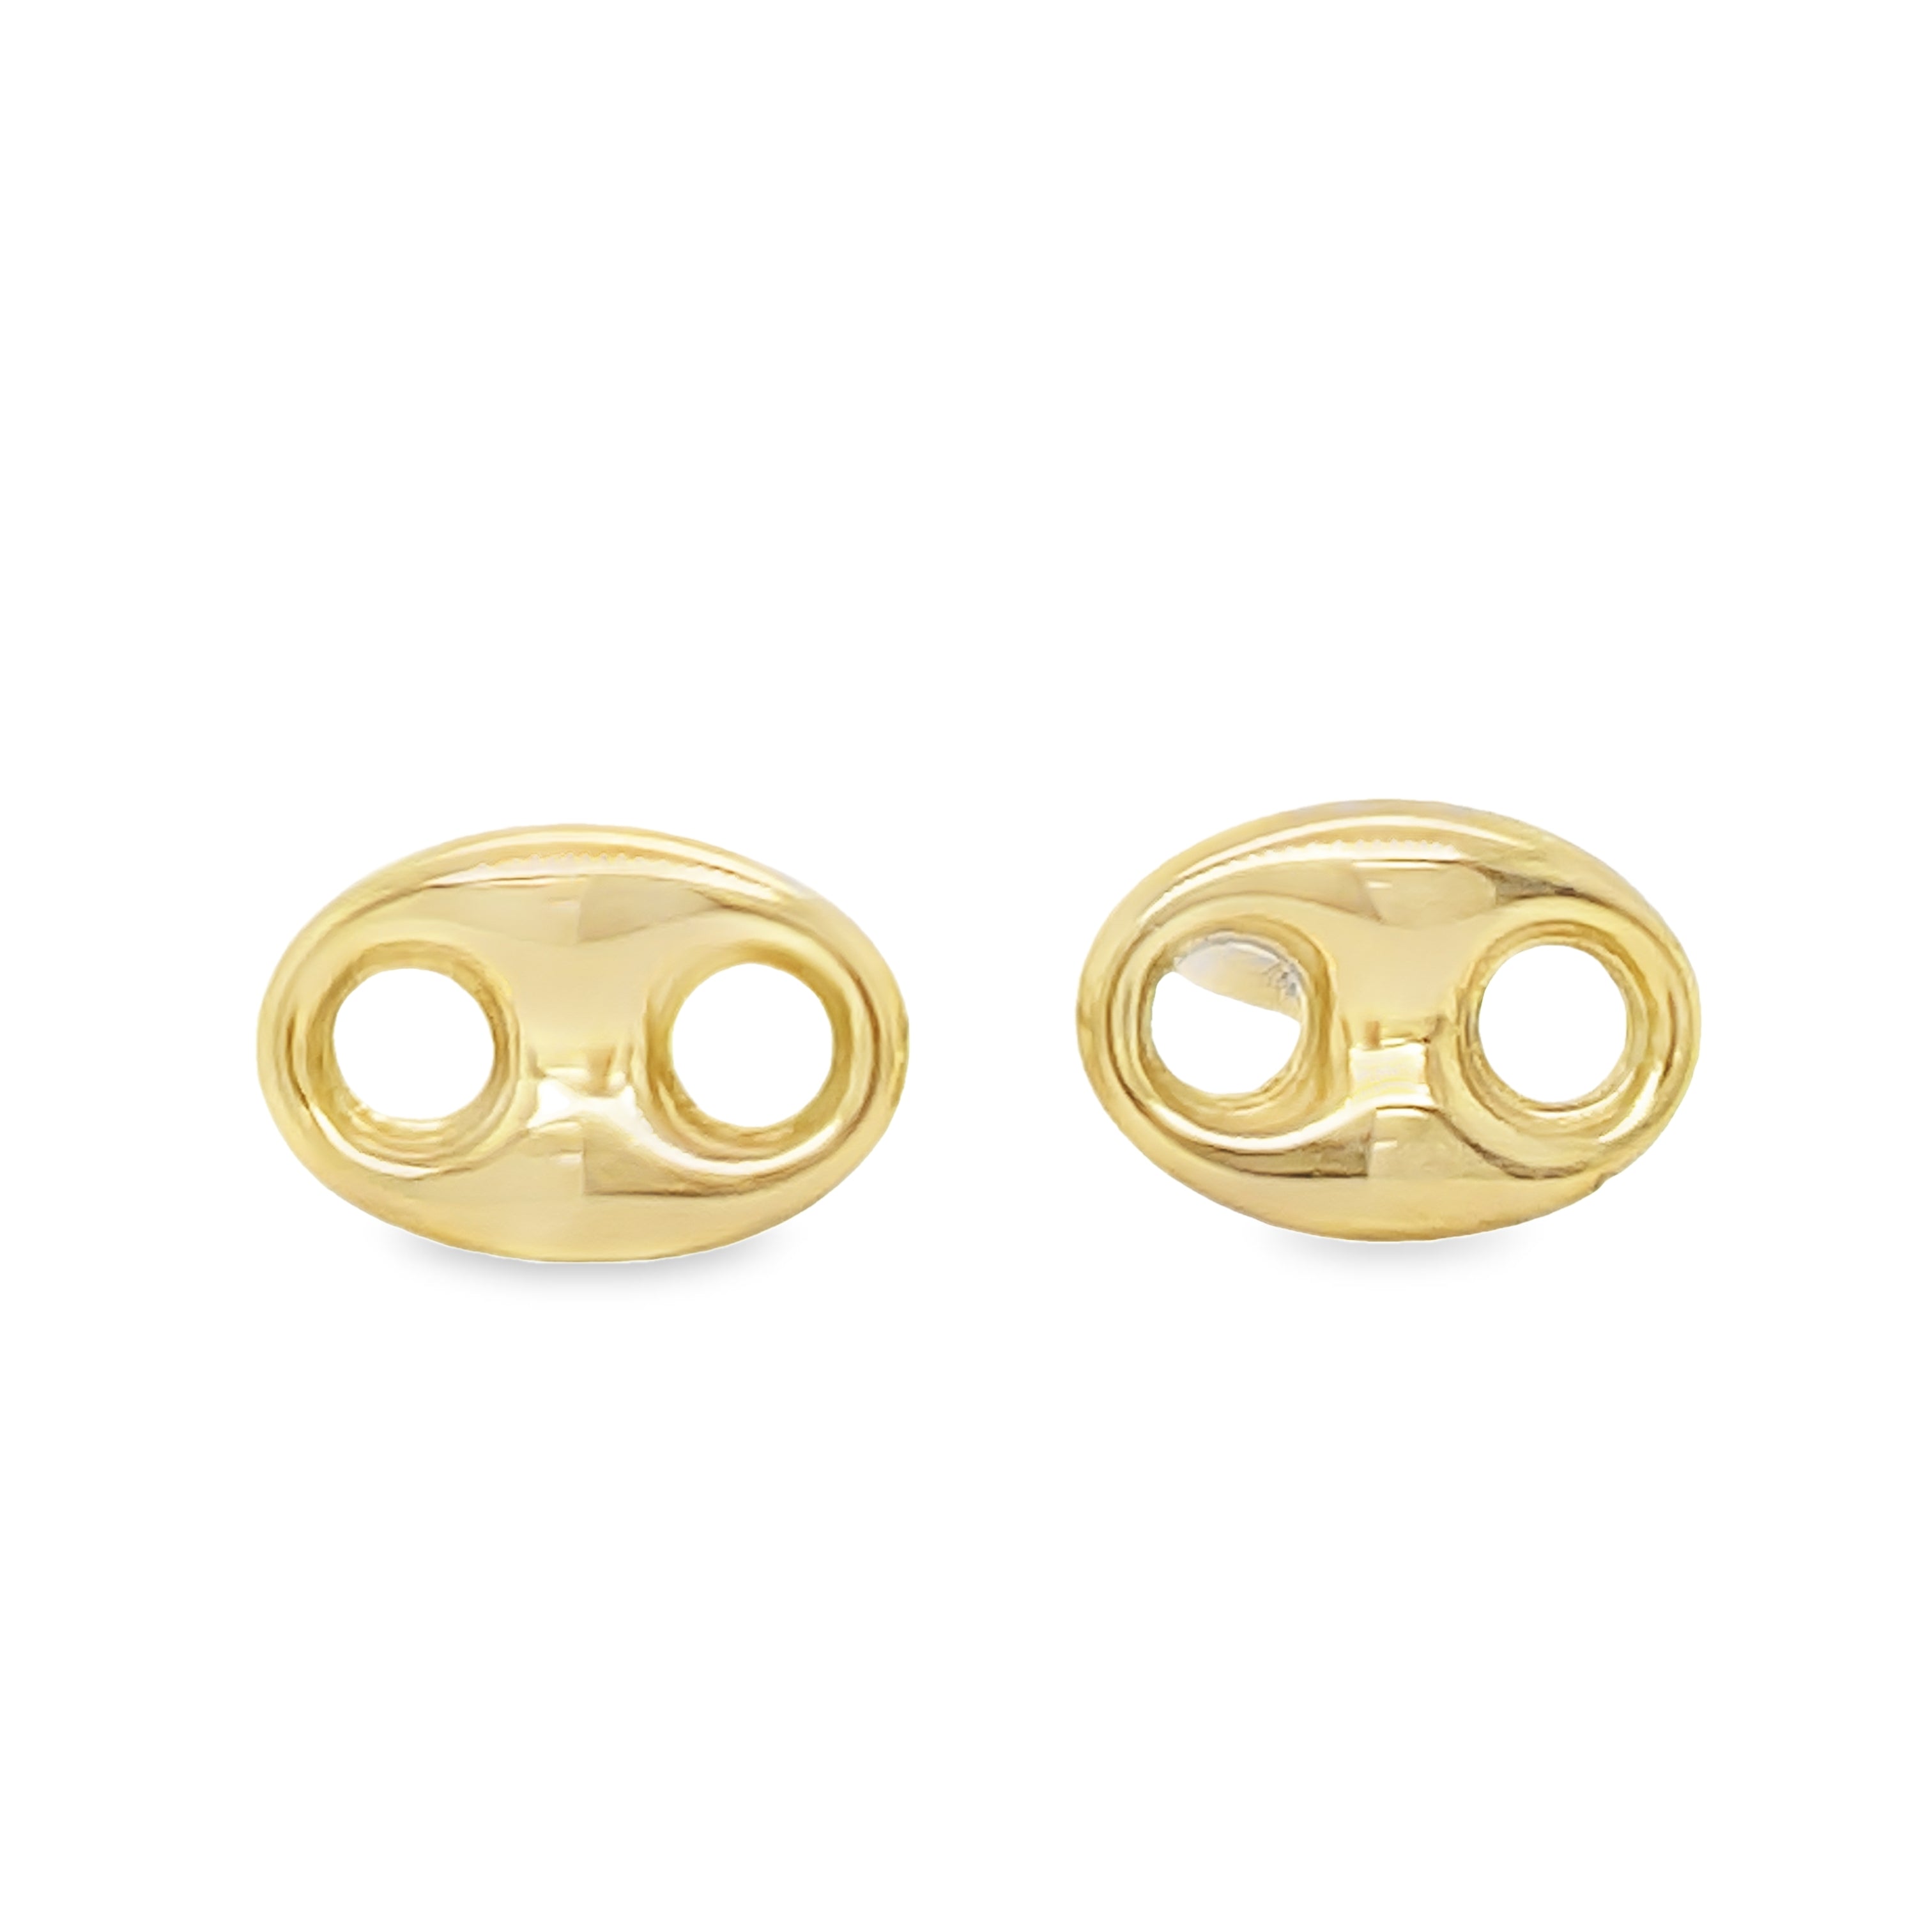 Elevate your style with these luxurious 14k yellow gold puffed mariner link earrings. Made in Italy with a secure friction back, the stylish mariner link design adds a touch of sophistication. At 8.00mm, these earrings are the perfect size to make a statement without being too heavy. Elevate your everyday style with these elegant and versatile earrings.